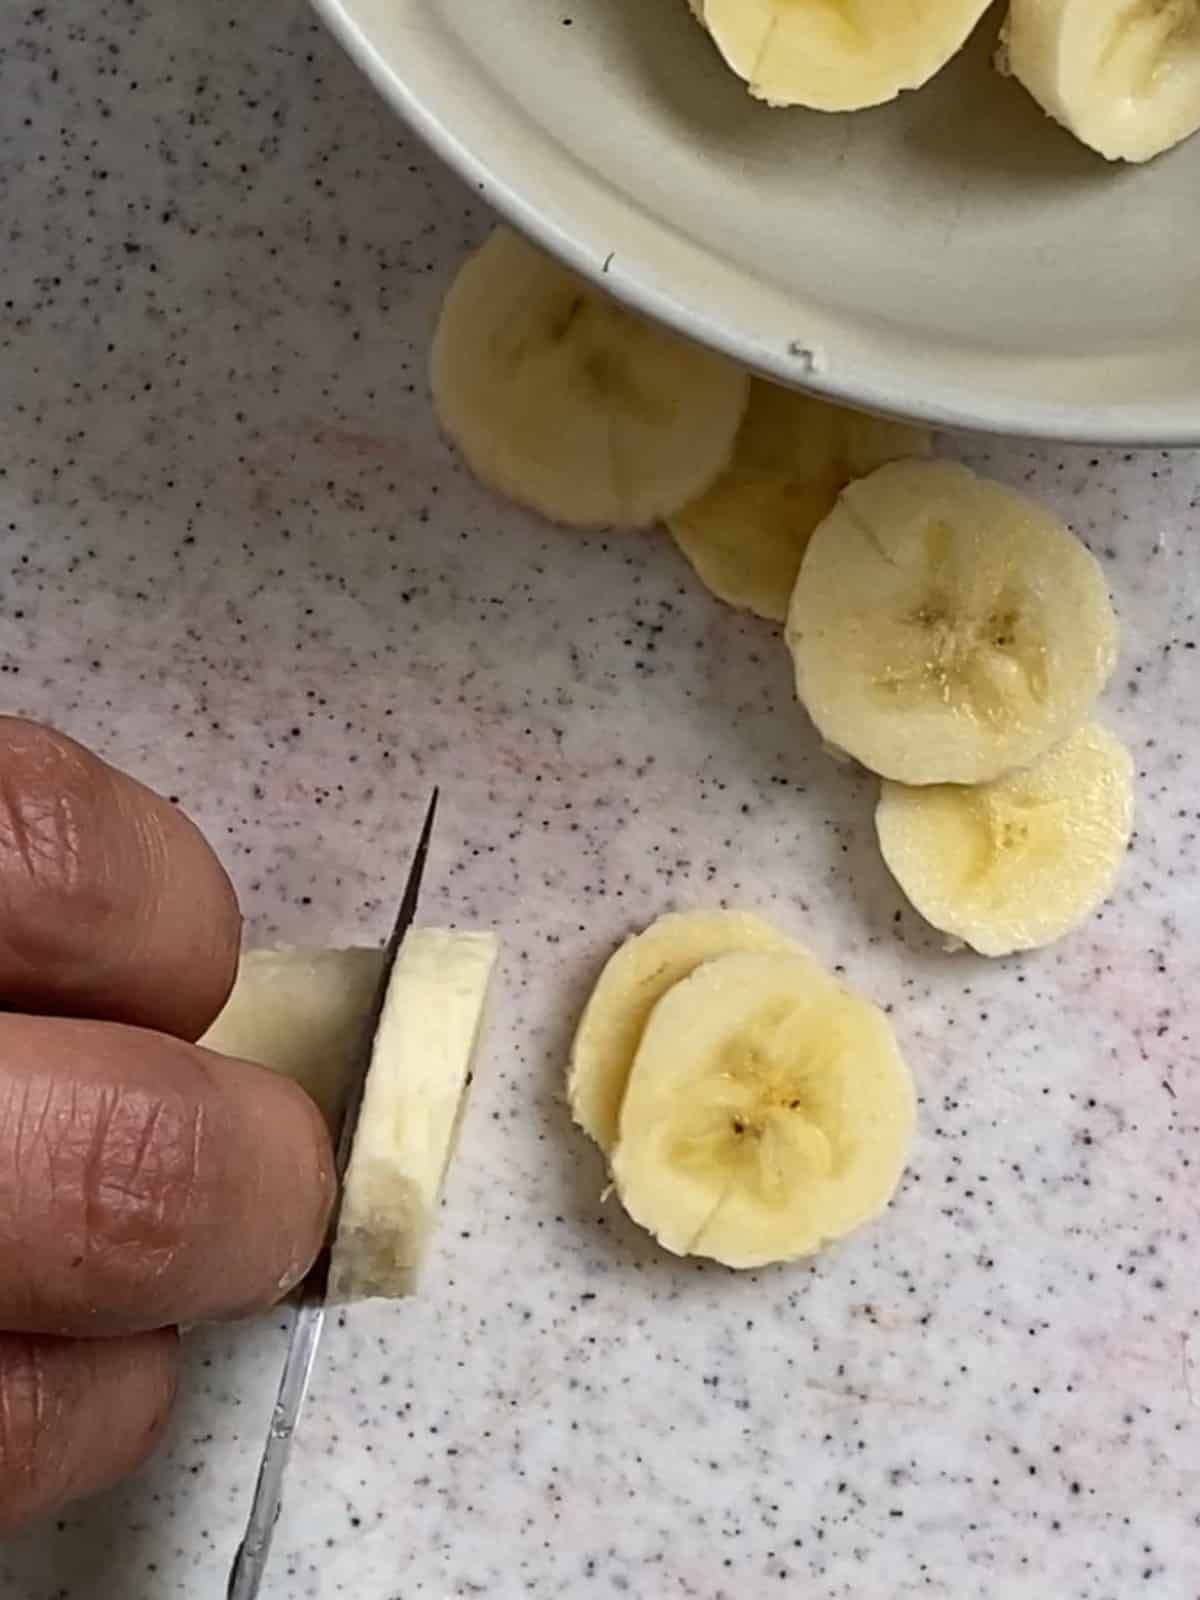 process of cutting bananas into slices